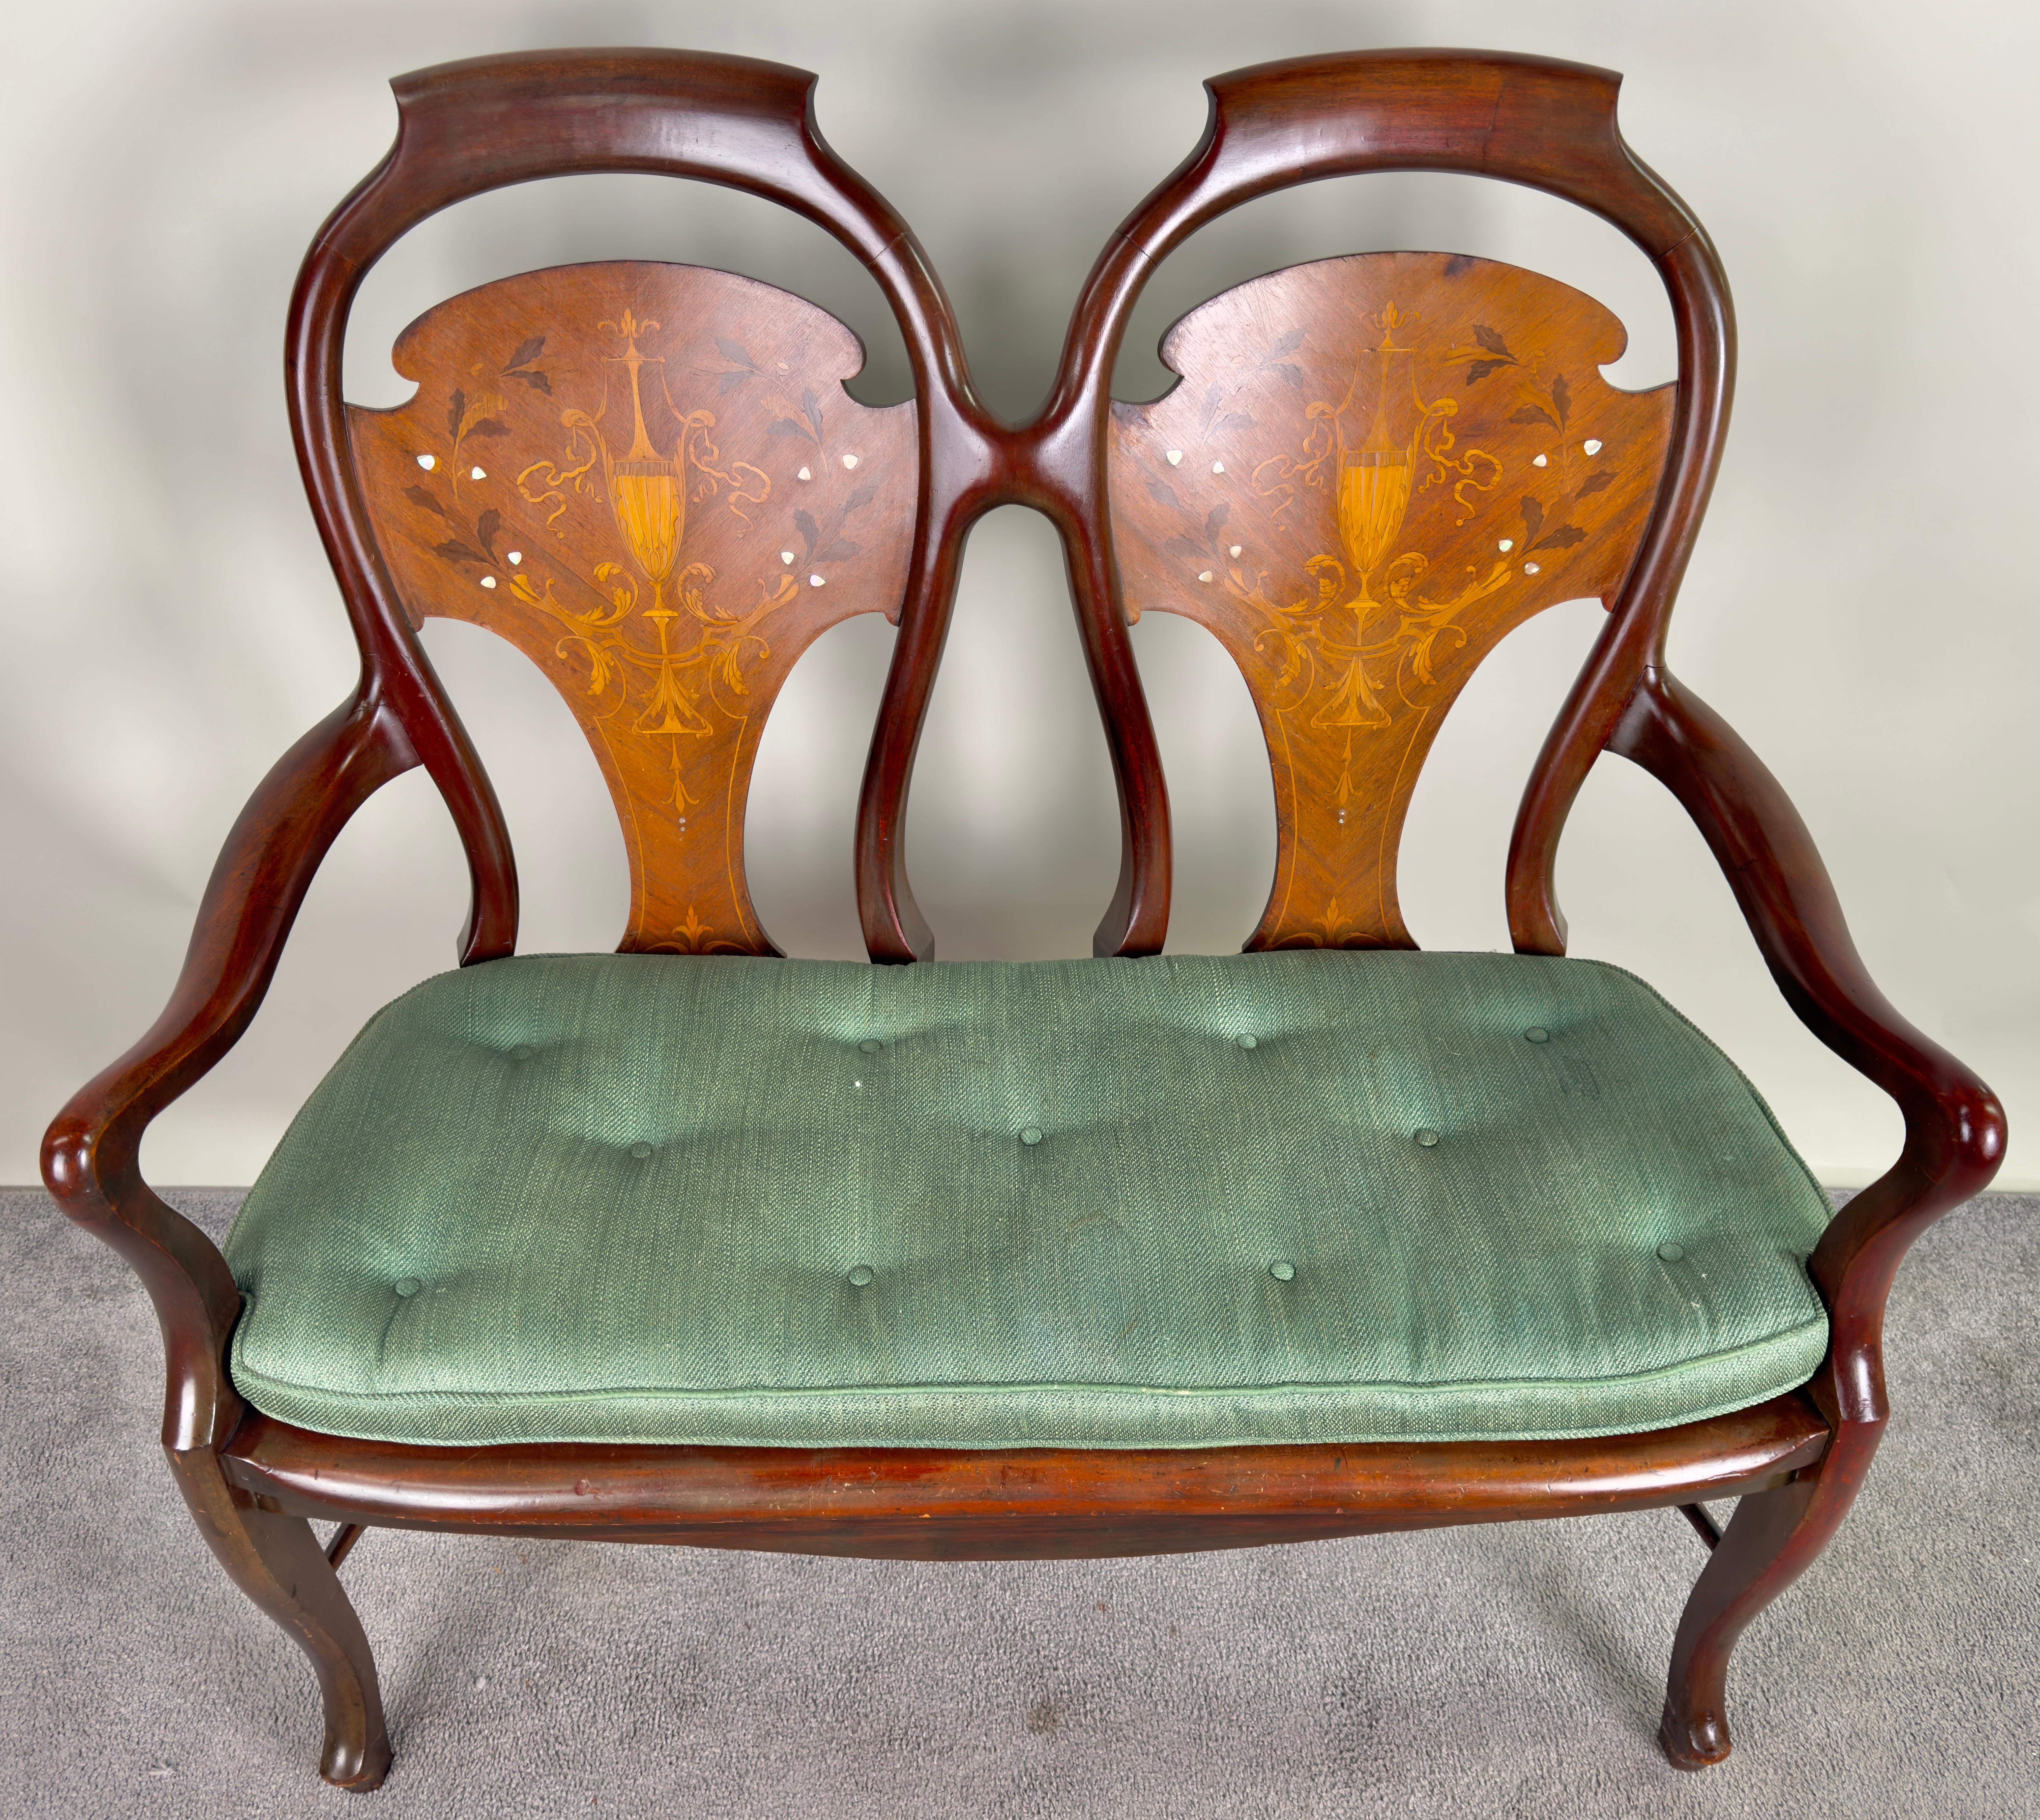 A  Queen Anne style two-seat settee, a masterpiece of refined craftsmanship. The seat back boasts rounded shoulders that exude sophistication. The inner panels show intricate marquetry inlay design. The meticulously carved arms and the Cabriole legs